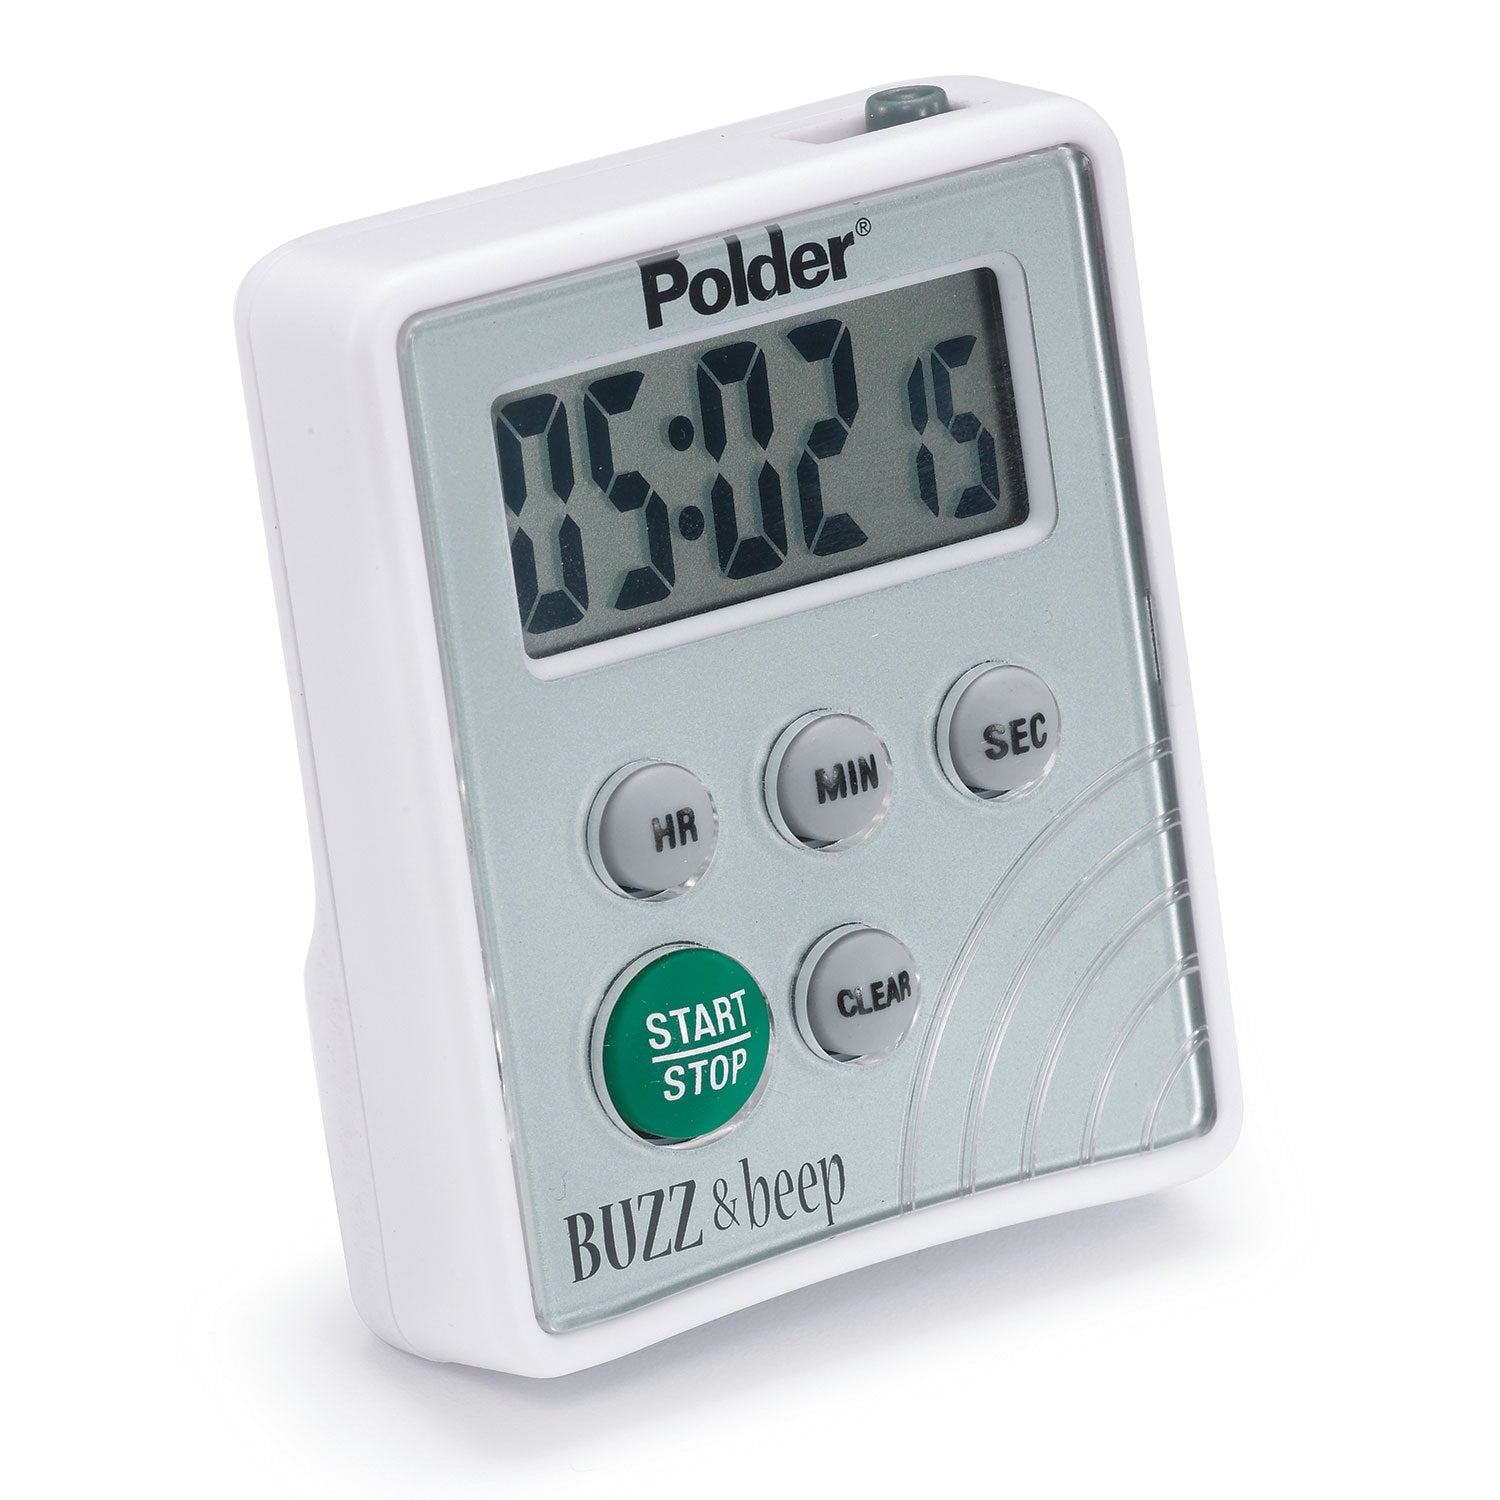 polder thermo timer clock instructions